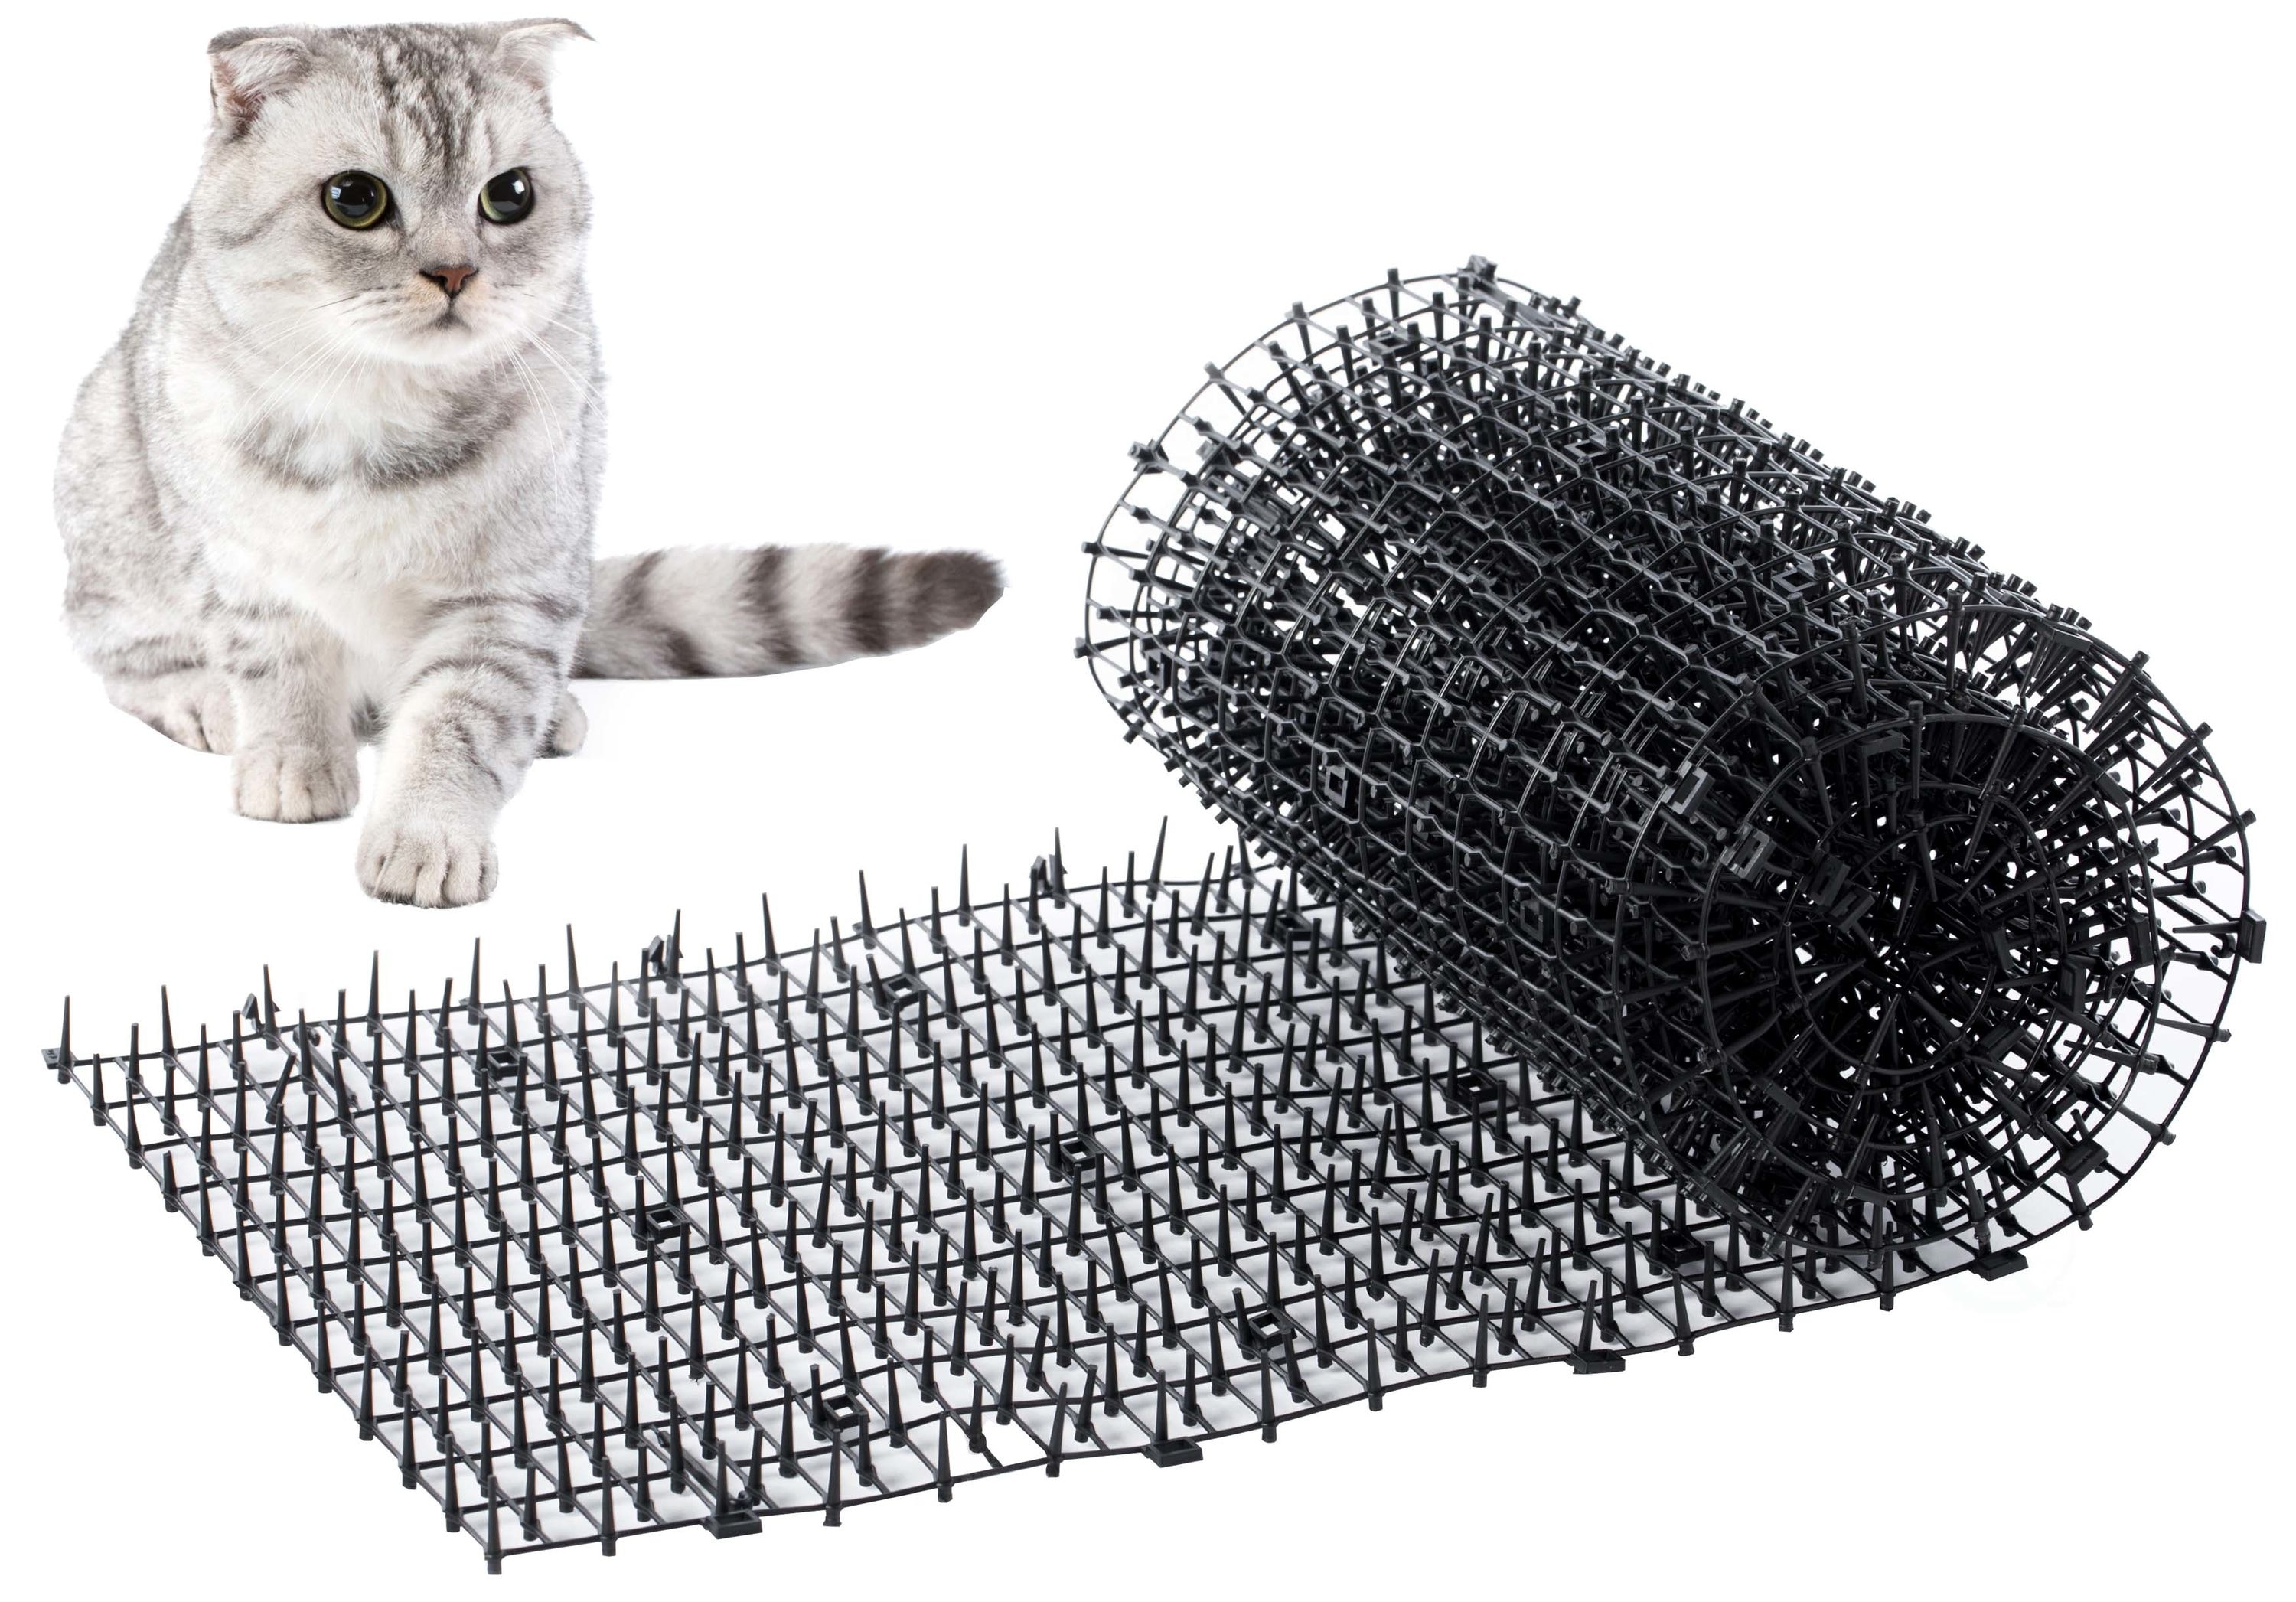 Cat Scratch Pad, Silicone Cat Scratching Pad, Multipurpose Cat Floor  Scratching Pad Rug, Protect Carpets, Sofas, Furniture, Cat Feeding Pad